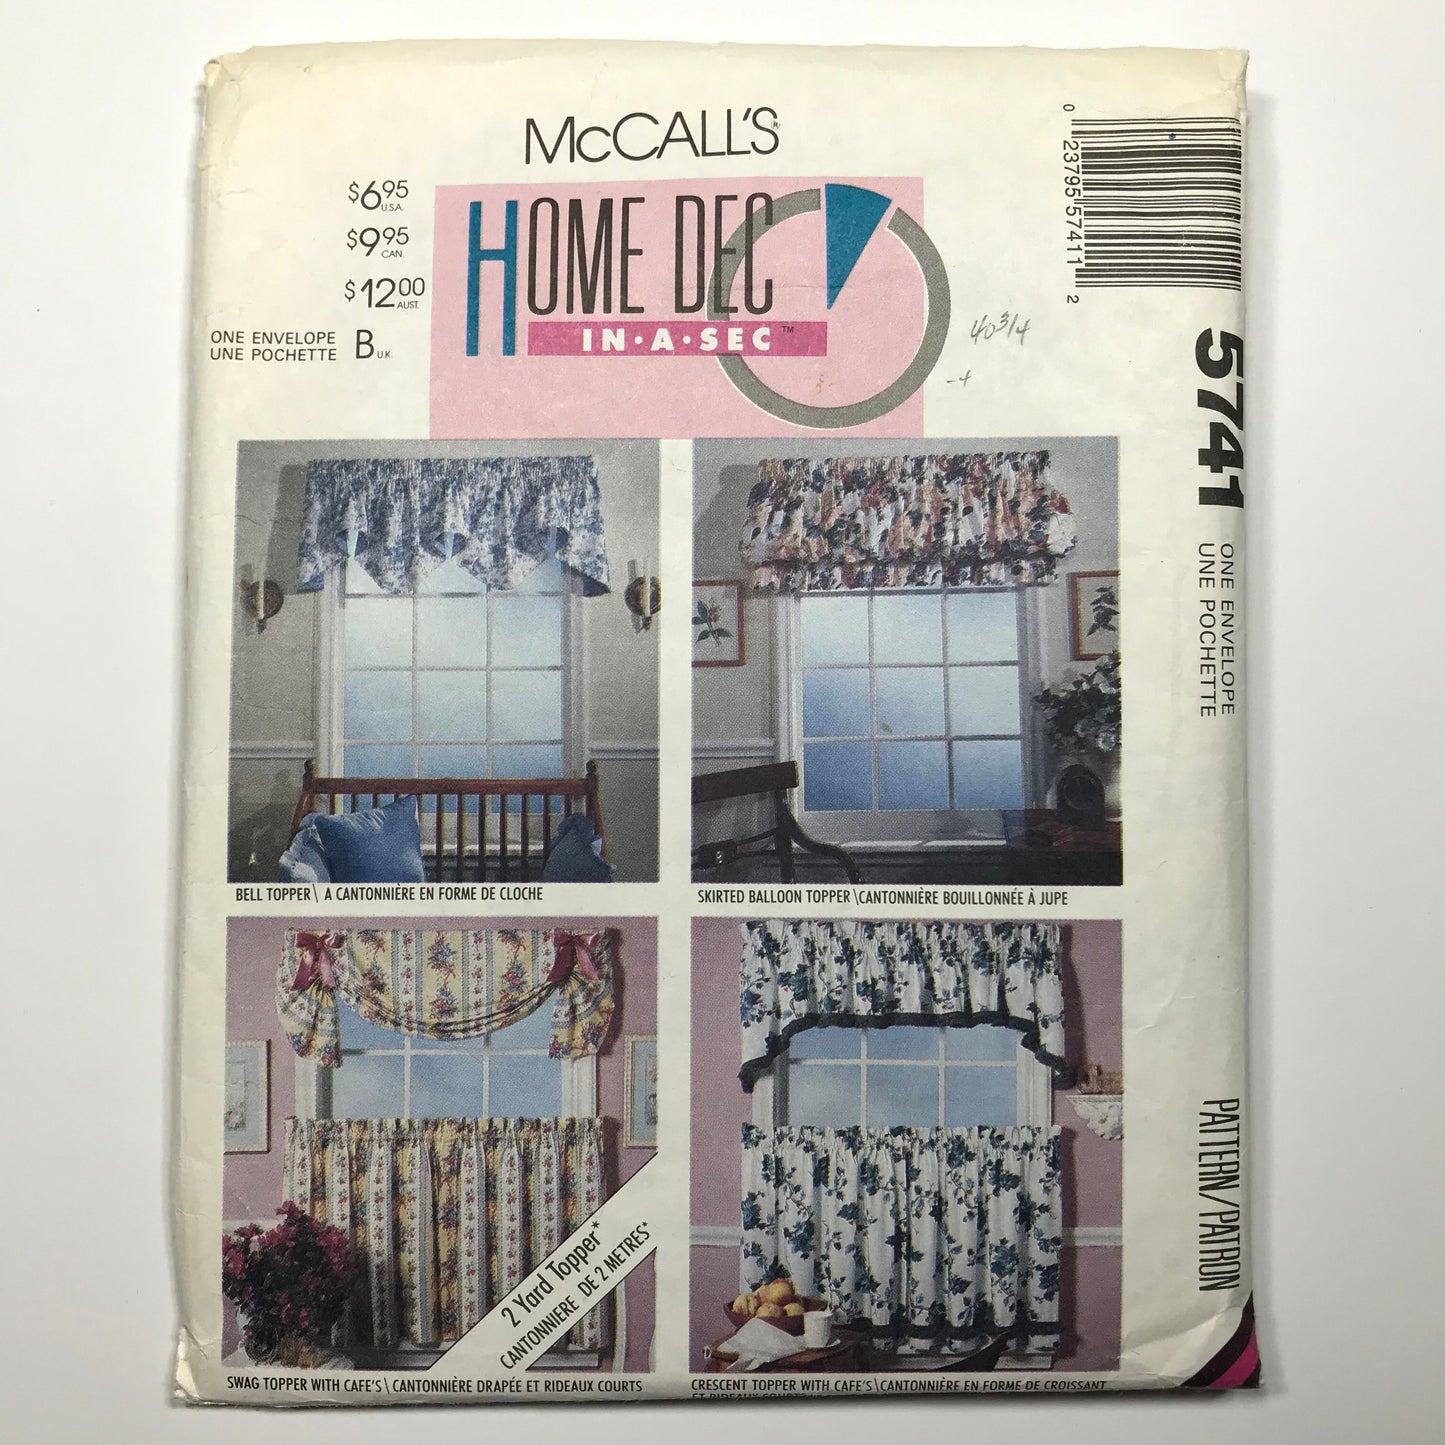 McCall's Home Dec In-A-Sec Bell, Skirted, Swag and Crescent Toppers and Cafe Curtains Pattern #5741